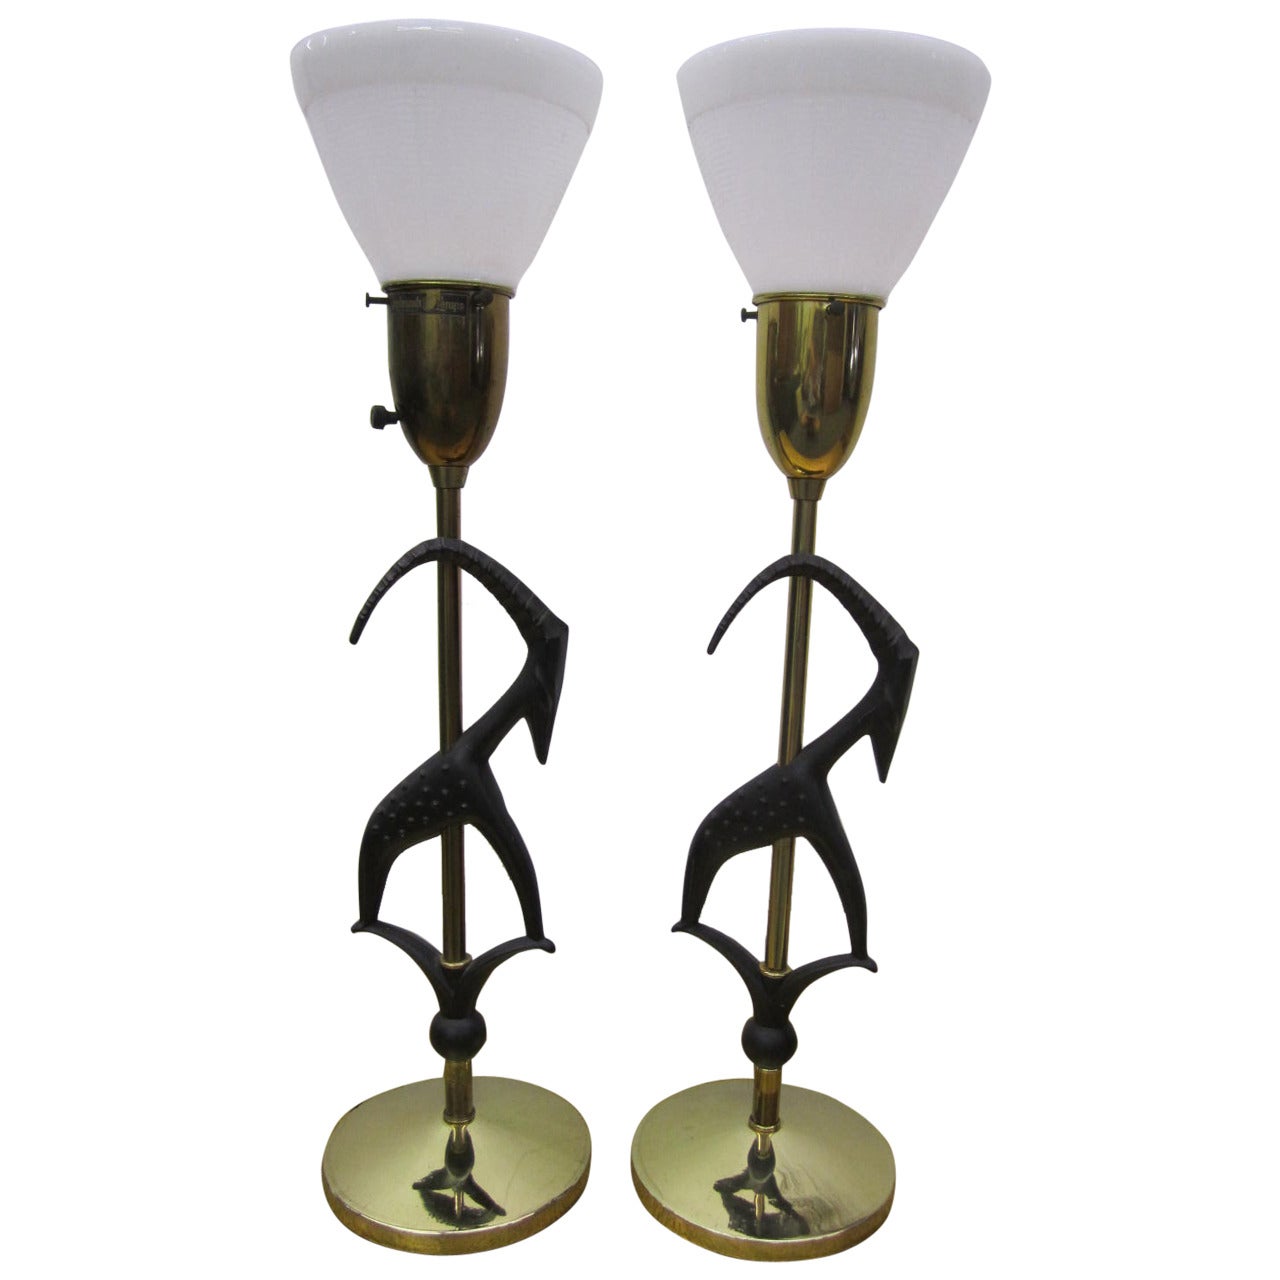 Pair of Rembrandt Antelope Gazelle Lamps with Glass Shades Mid-Century Modern